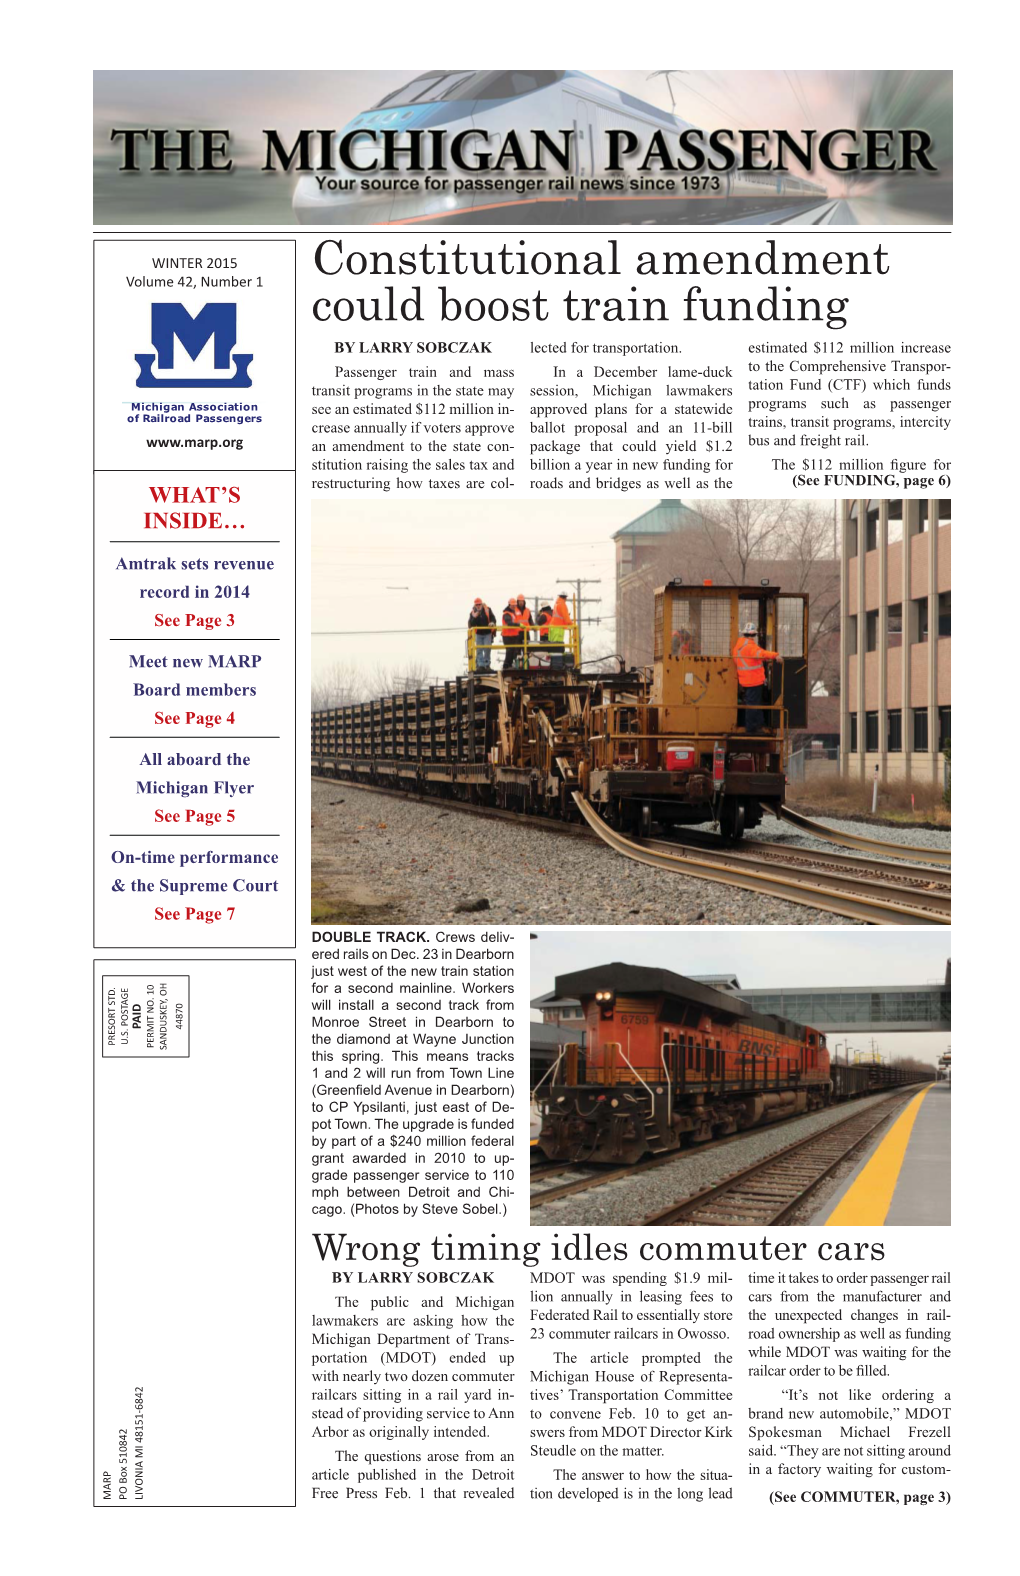 Constitutional Amendment Could Boost Train Funding by LARRY SOBCZAK Lected for Transportation